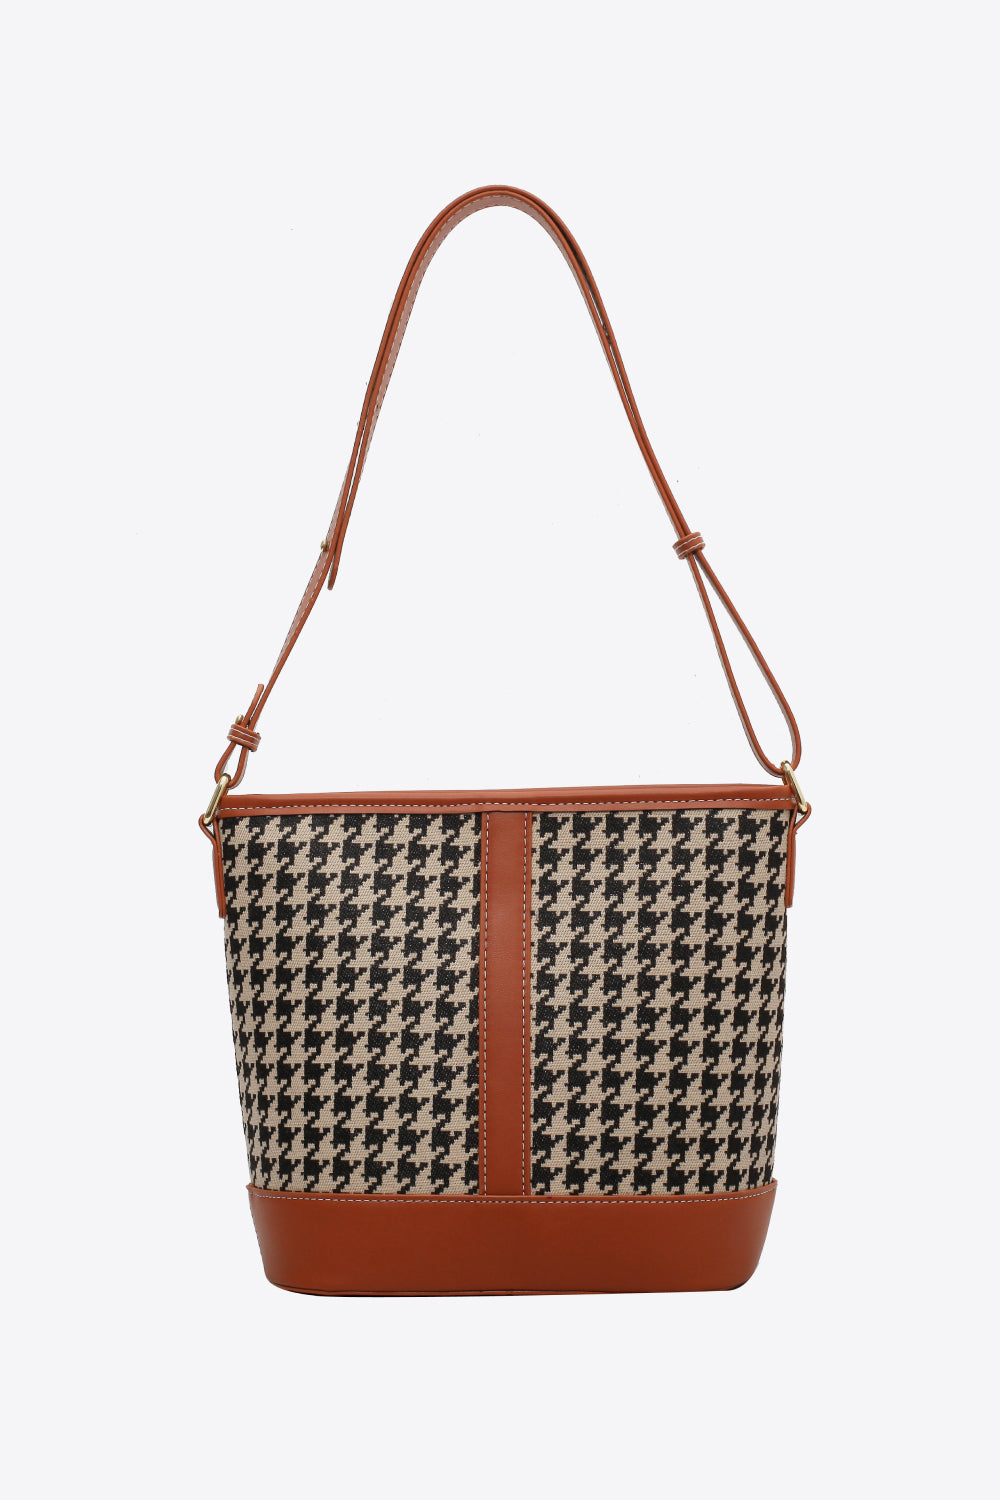 Classy and Fabulous Houndstooth Vegan Leather Shoulder Bag